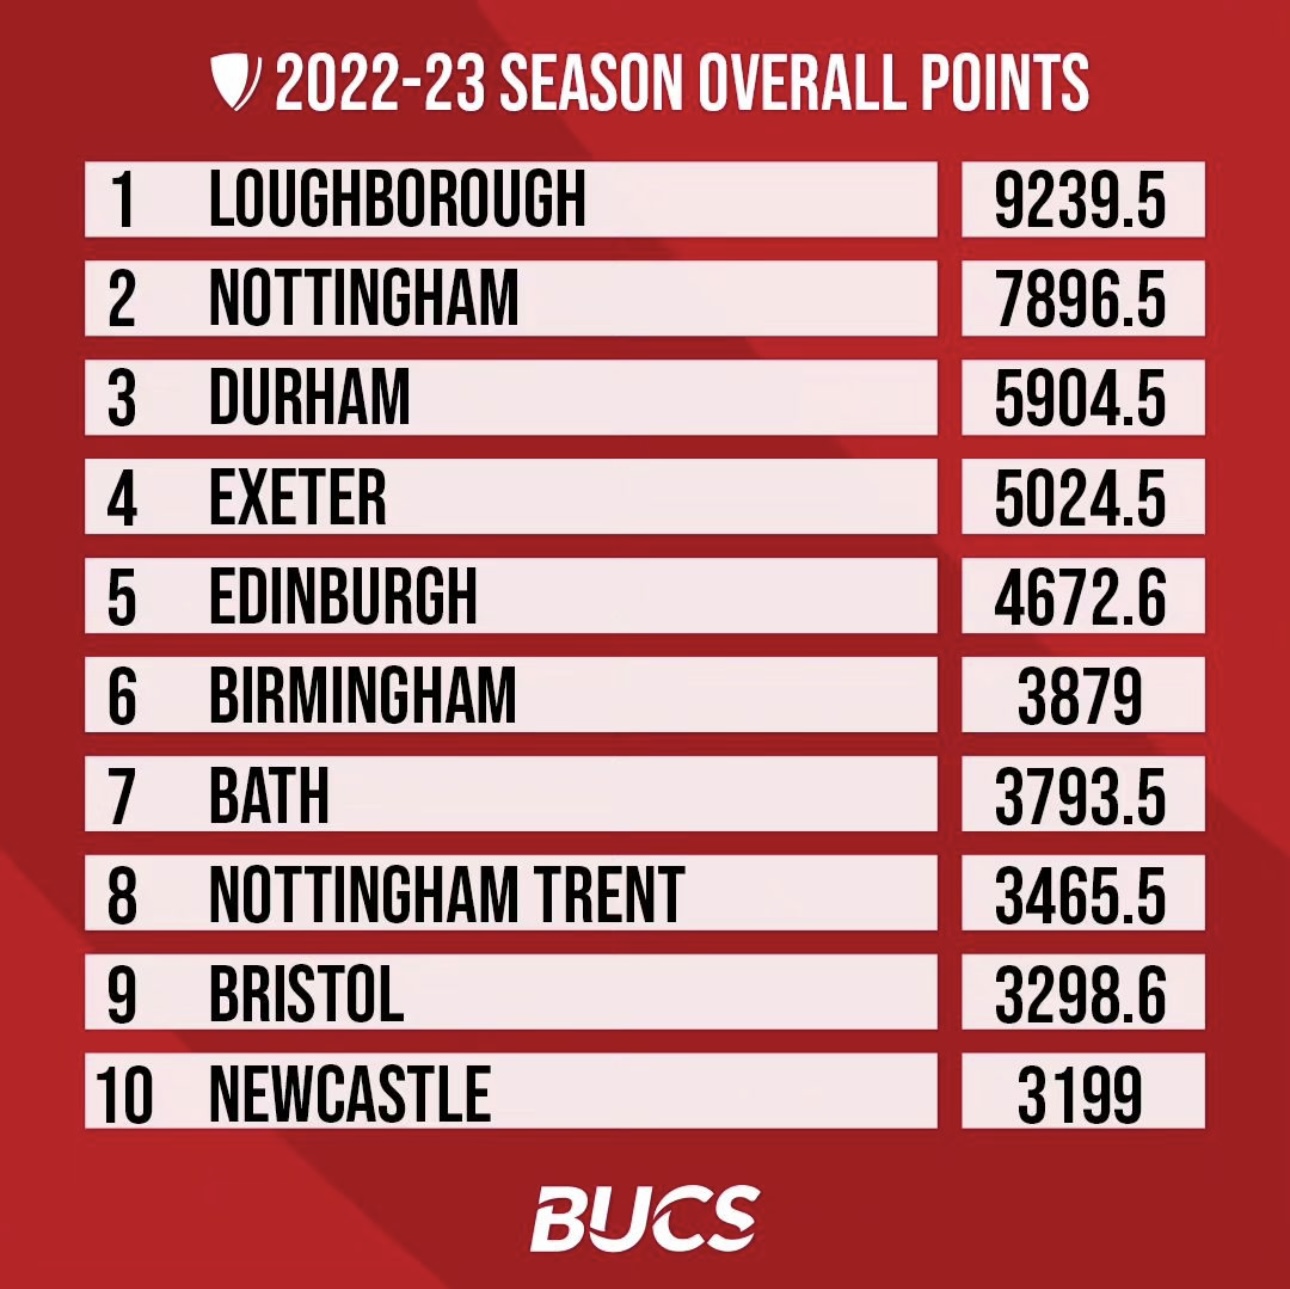 A table showing the final standings of the 2022/23 BUCS season